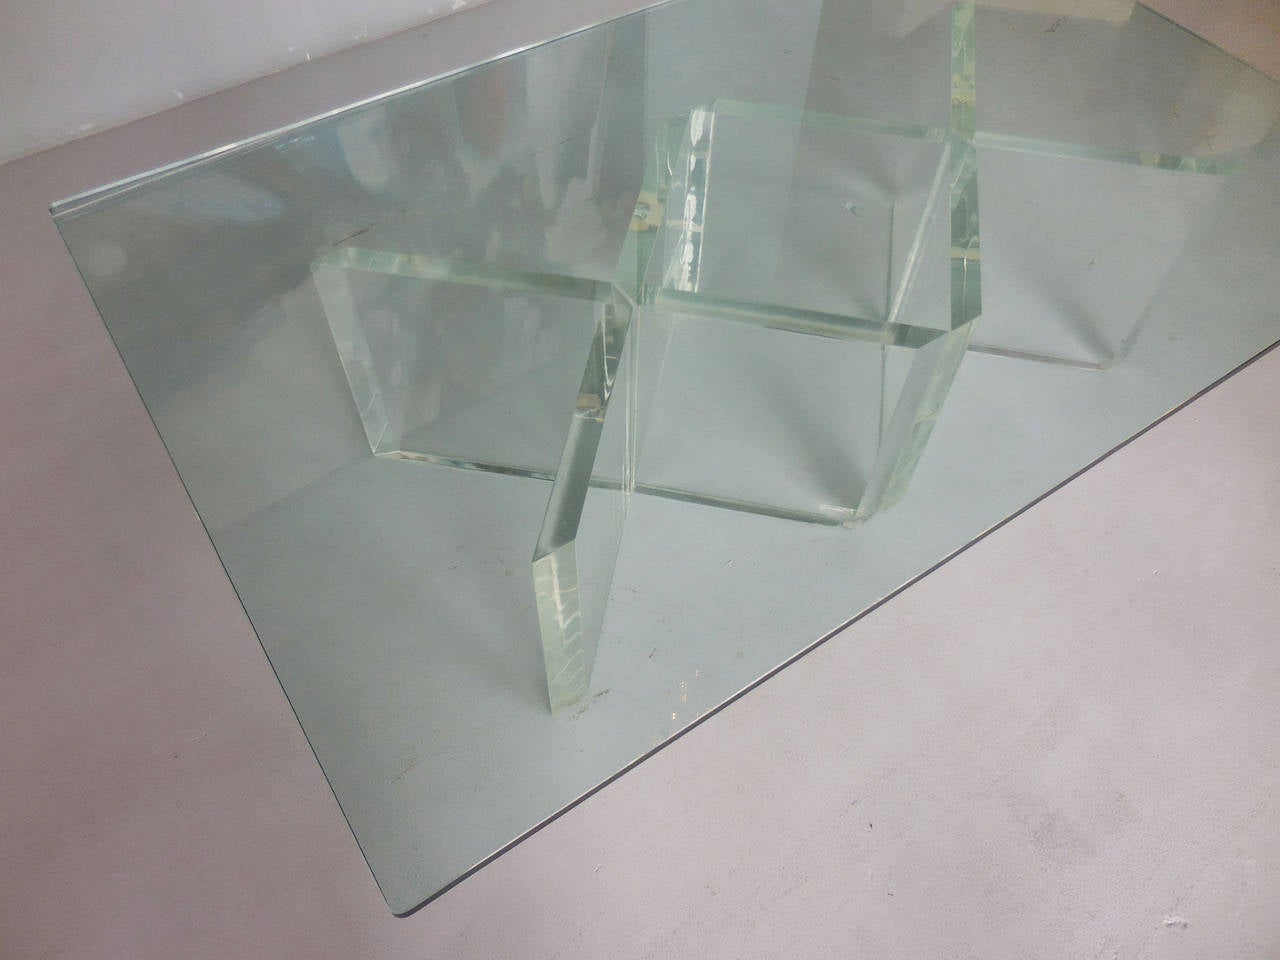 A great looking coffee table by John Mascheroni. Four thick Lucite angular bases, support the glass top. Signed on Lucite. Glass top has rounded corners. Bases could also be arrange in other configurations. Lucite is 1.5